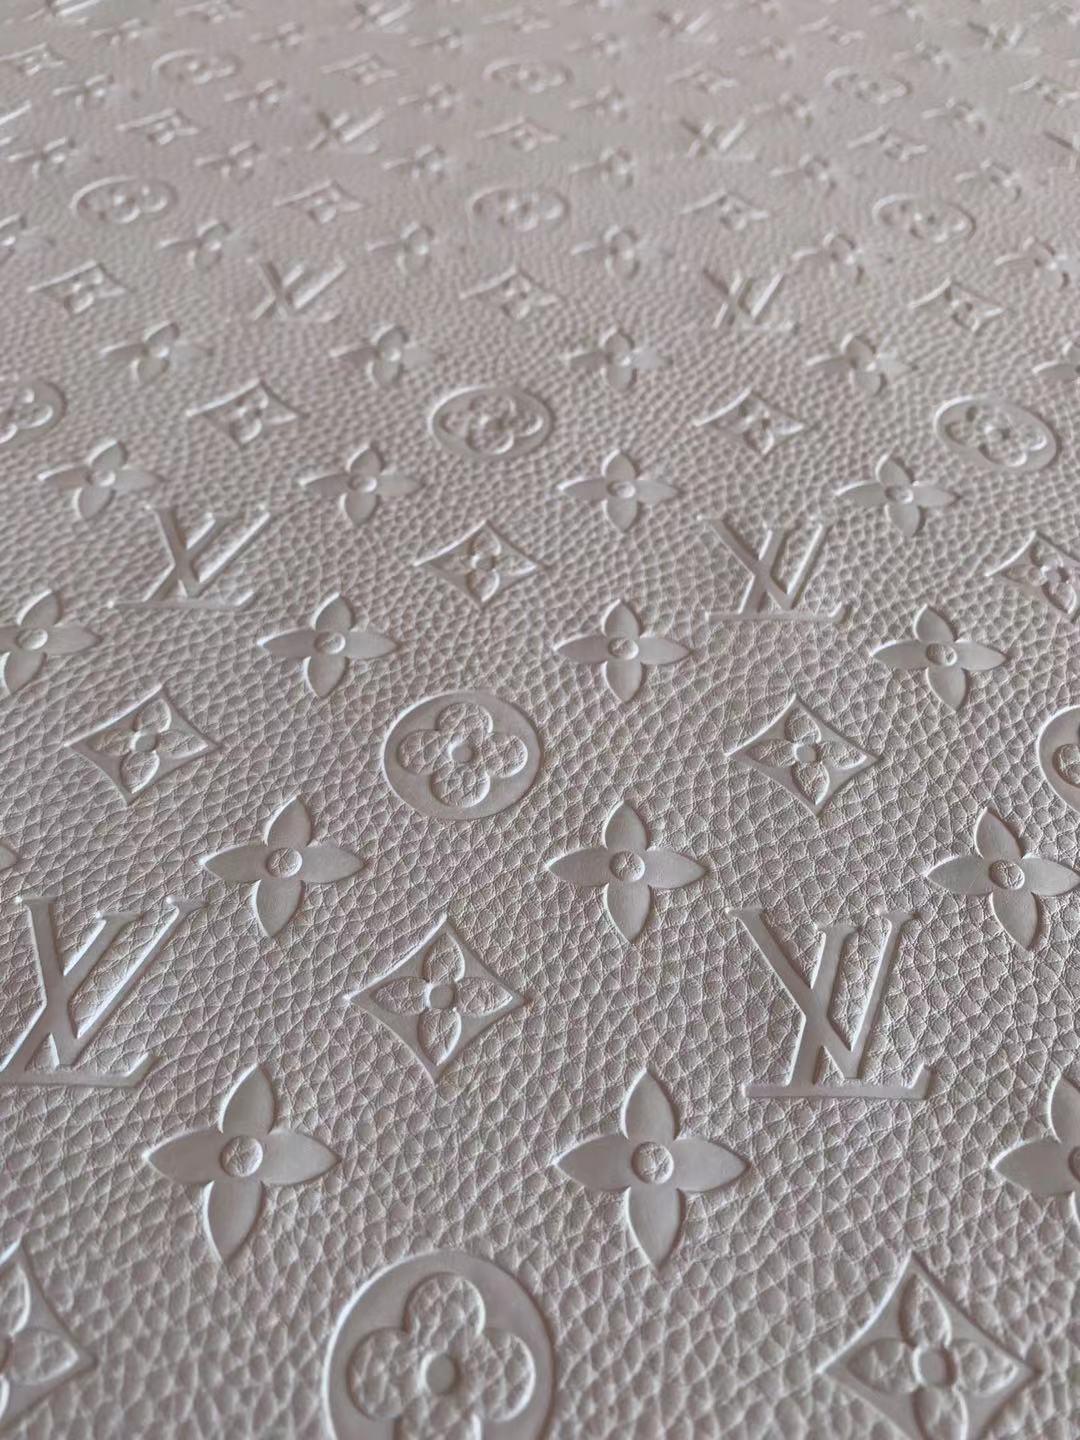 Fashion Embossed LV Crafting Leather Fabric For Handmade Bags ,Shoes a ...